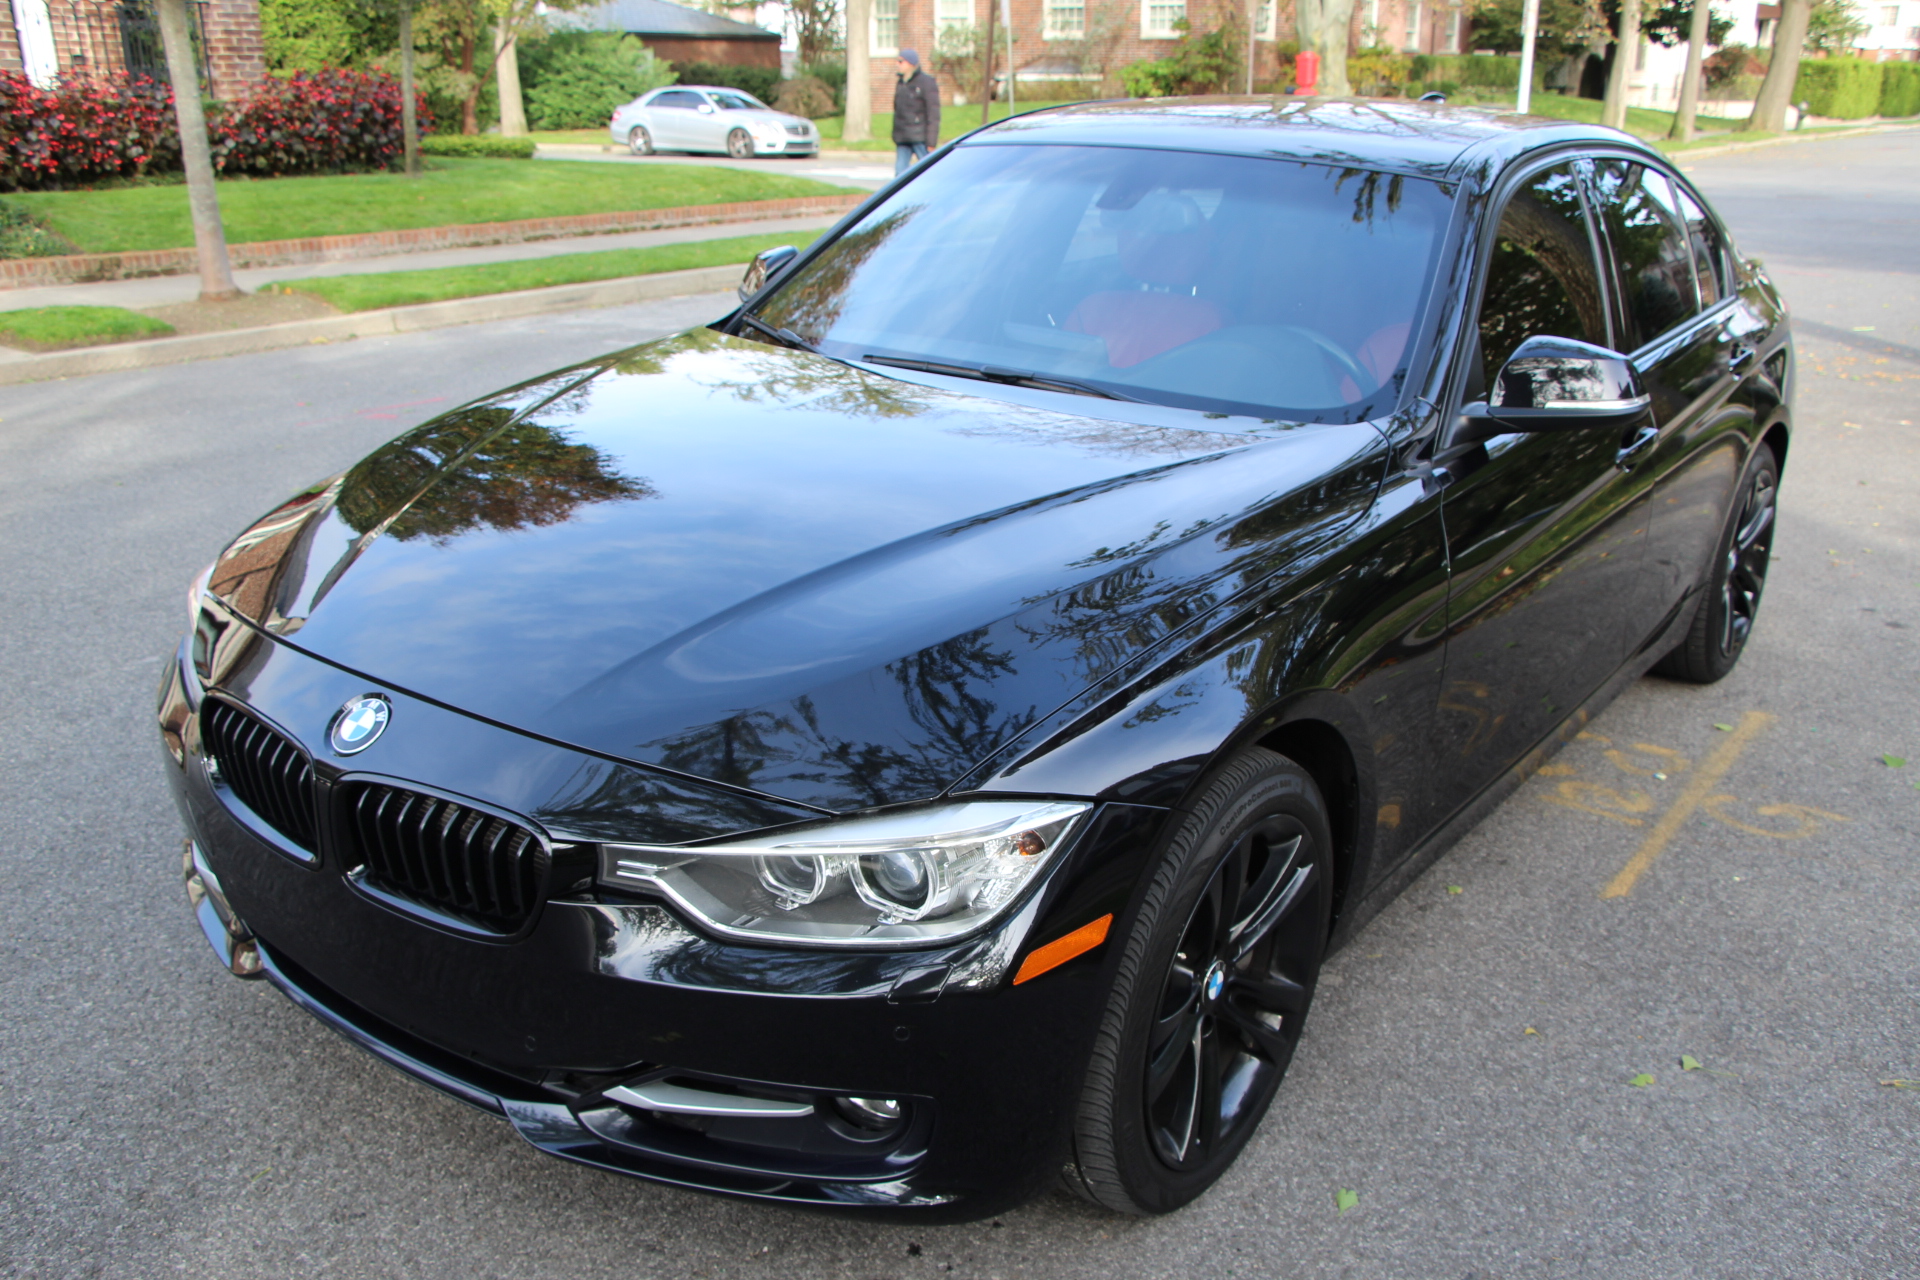 Buy Used 2014 BMW 335i xDRIVE PREMIUM SPORT for $19 900 from trusted dealer  in Brooklyn, NY!